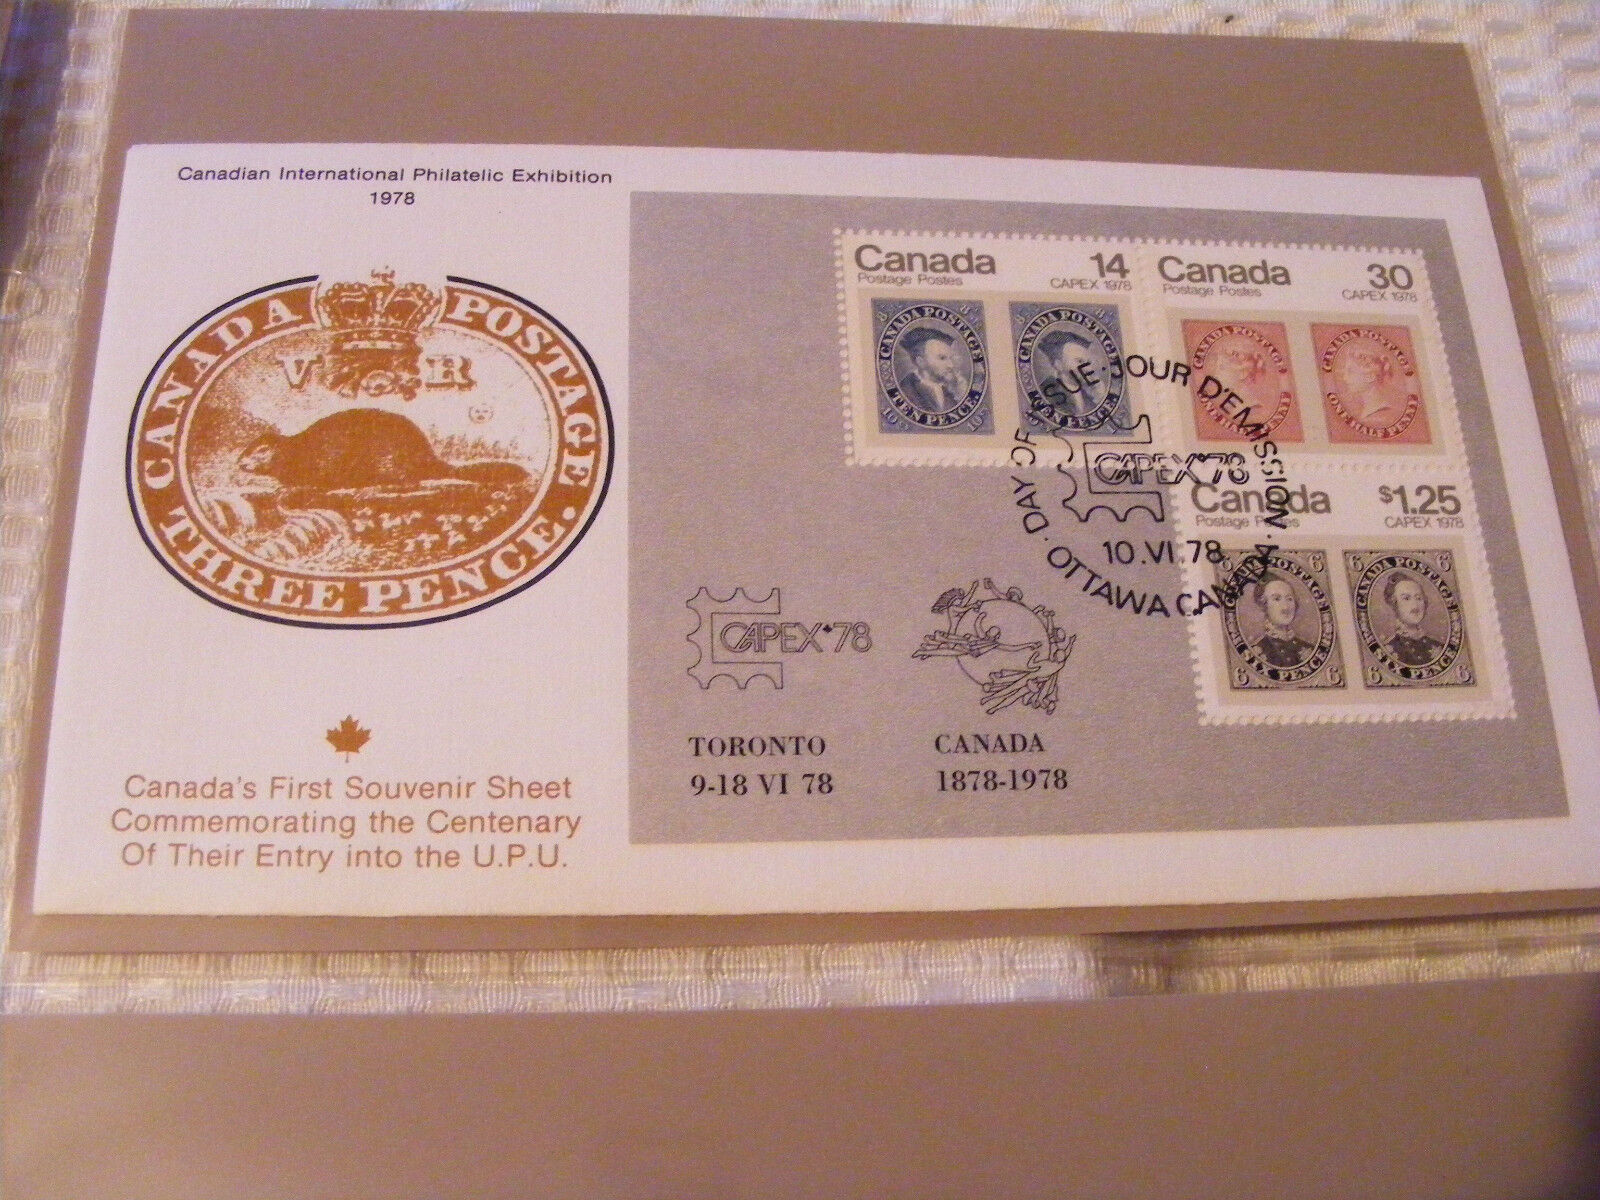 Canada  37  First  Day  Covers  1971 To 1978   In  A  Tan  Coloured   Safe Album Без бренда - фотография #11